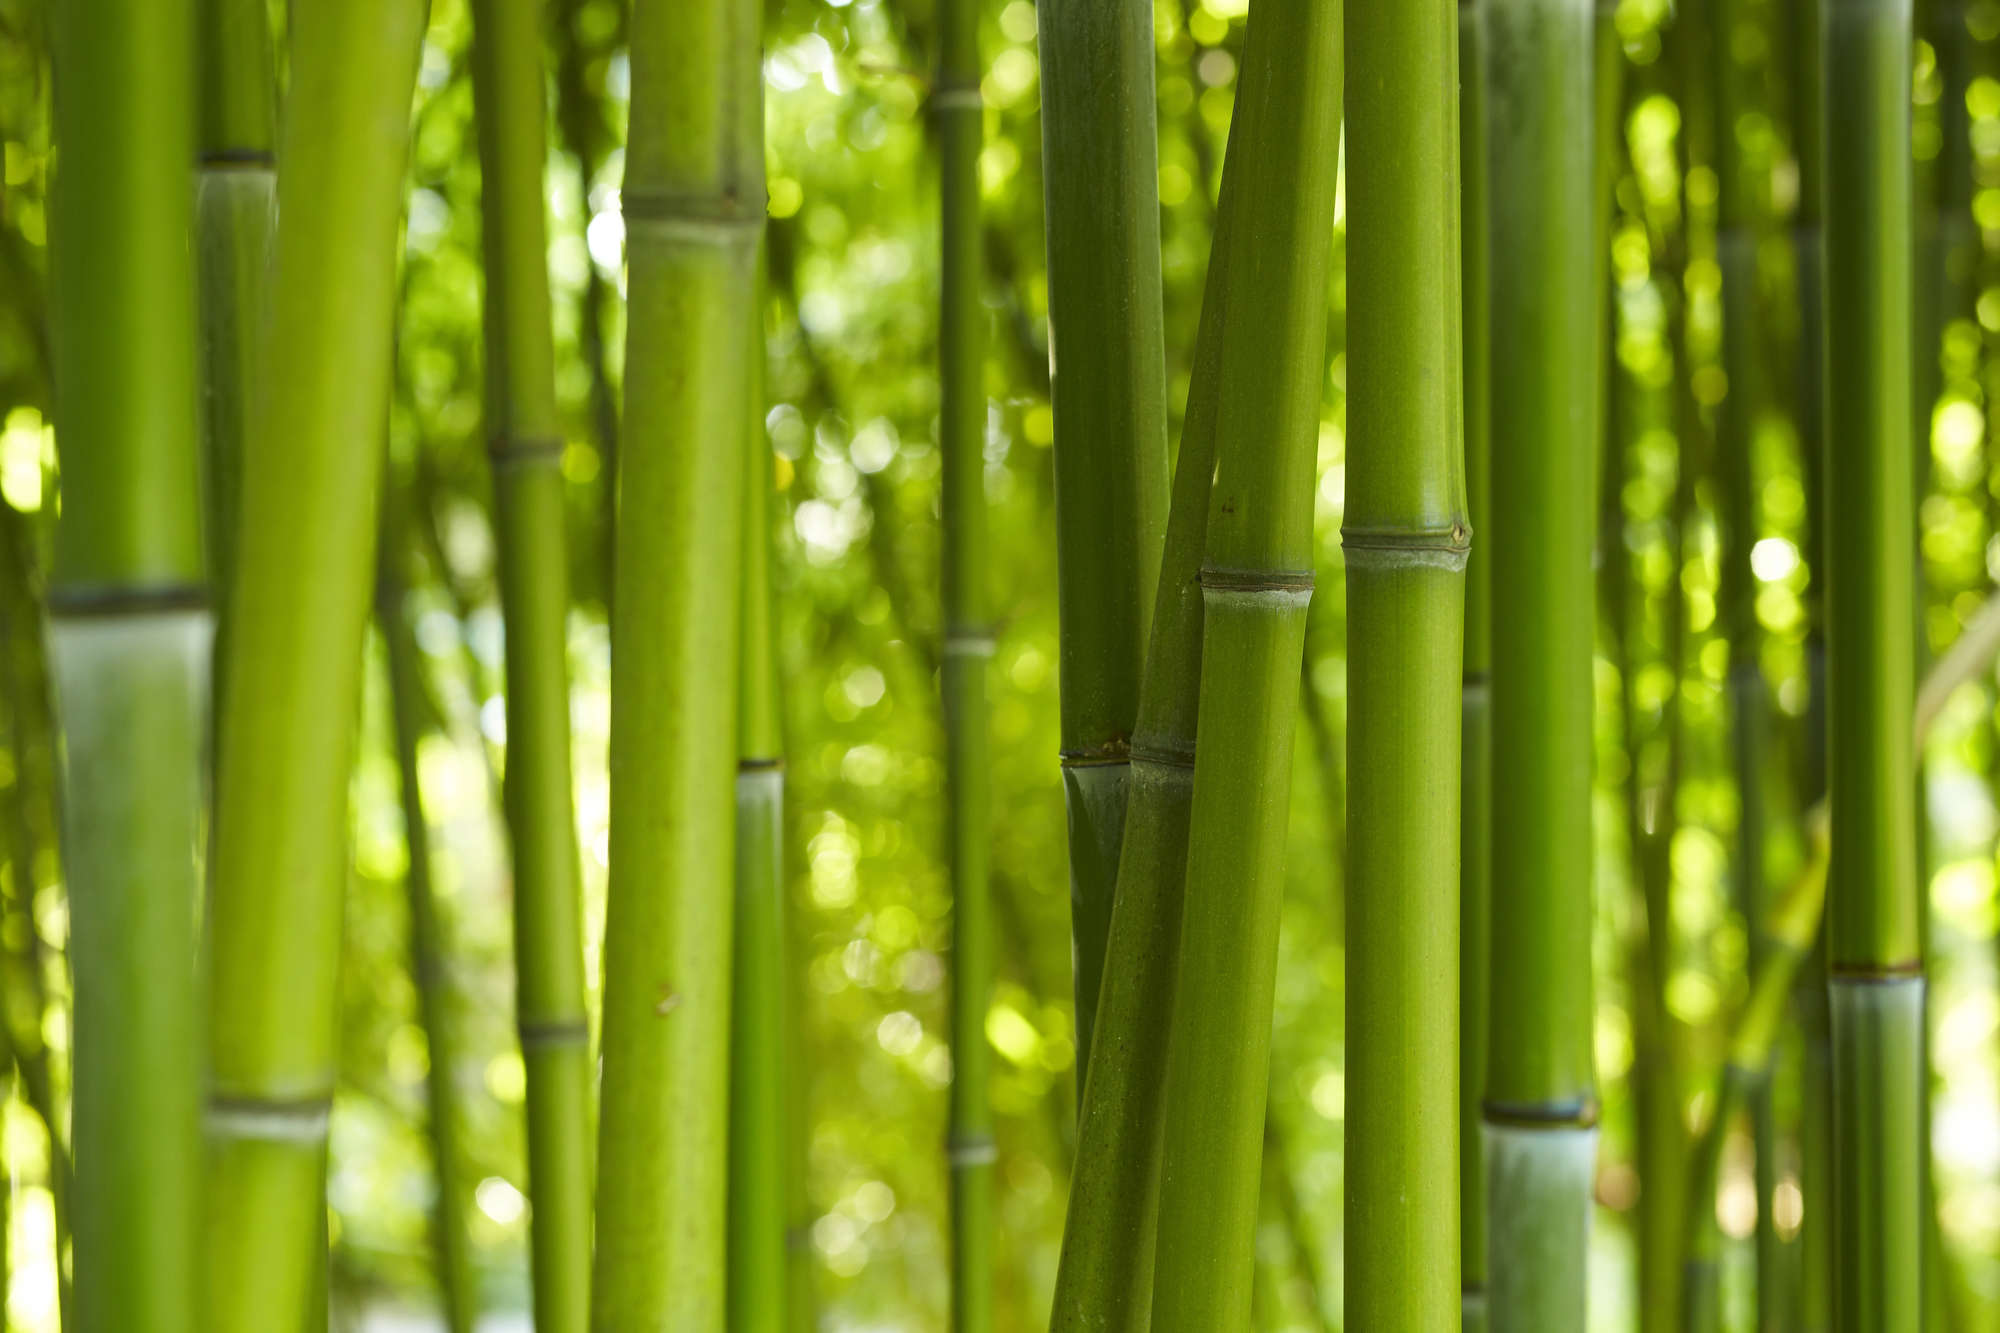             Nature photo wallpaper bamboo close-up on textured non-woven
        